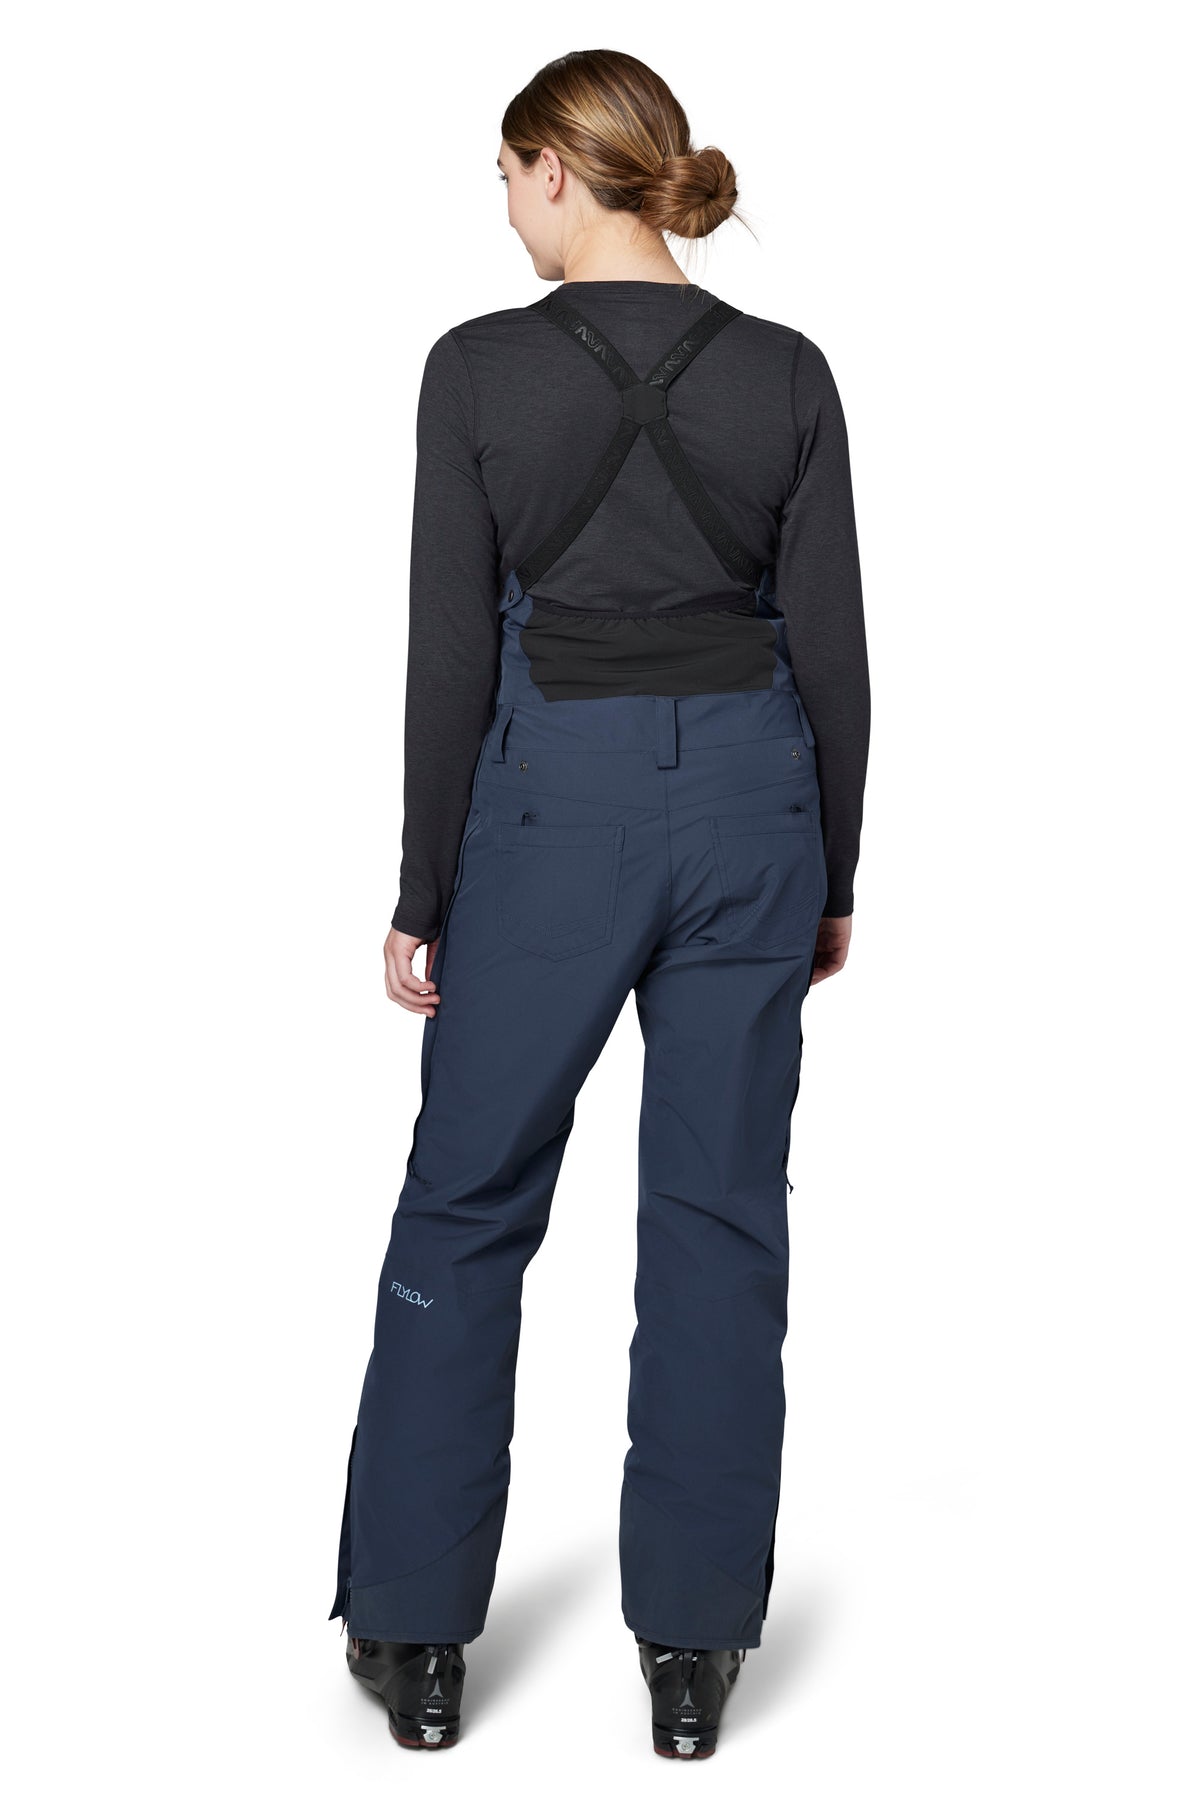 Liquid Women's Celeste Lined Insulated Bib Snow Pant - My Cooling